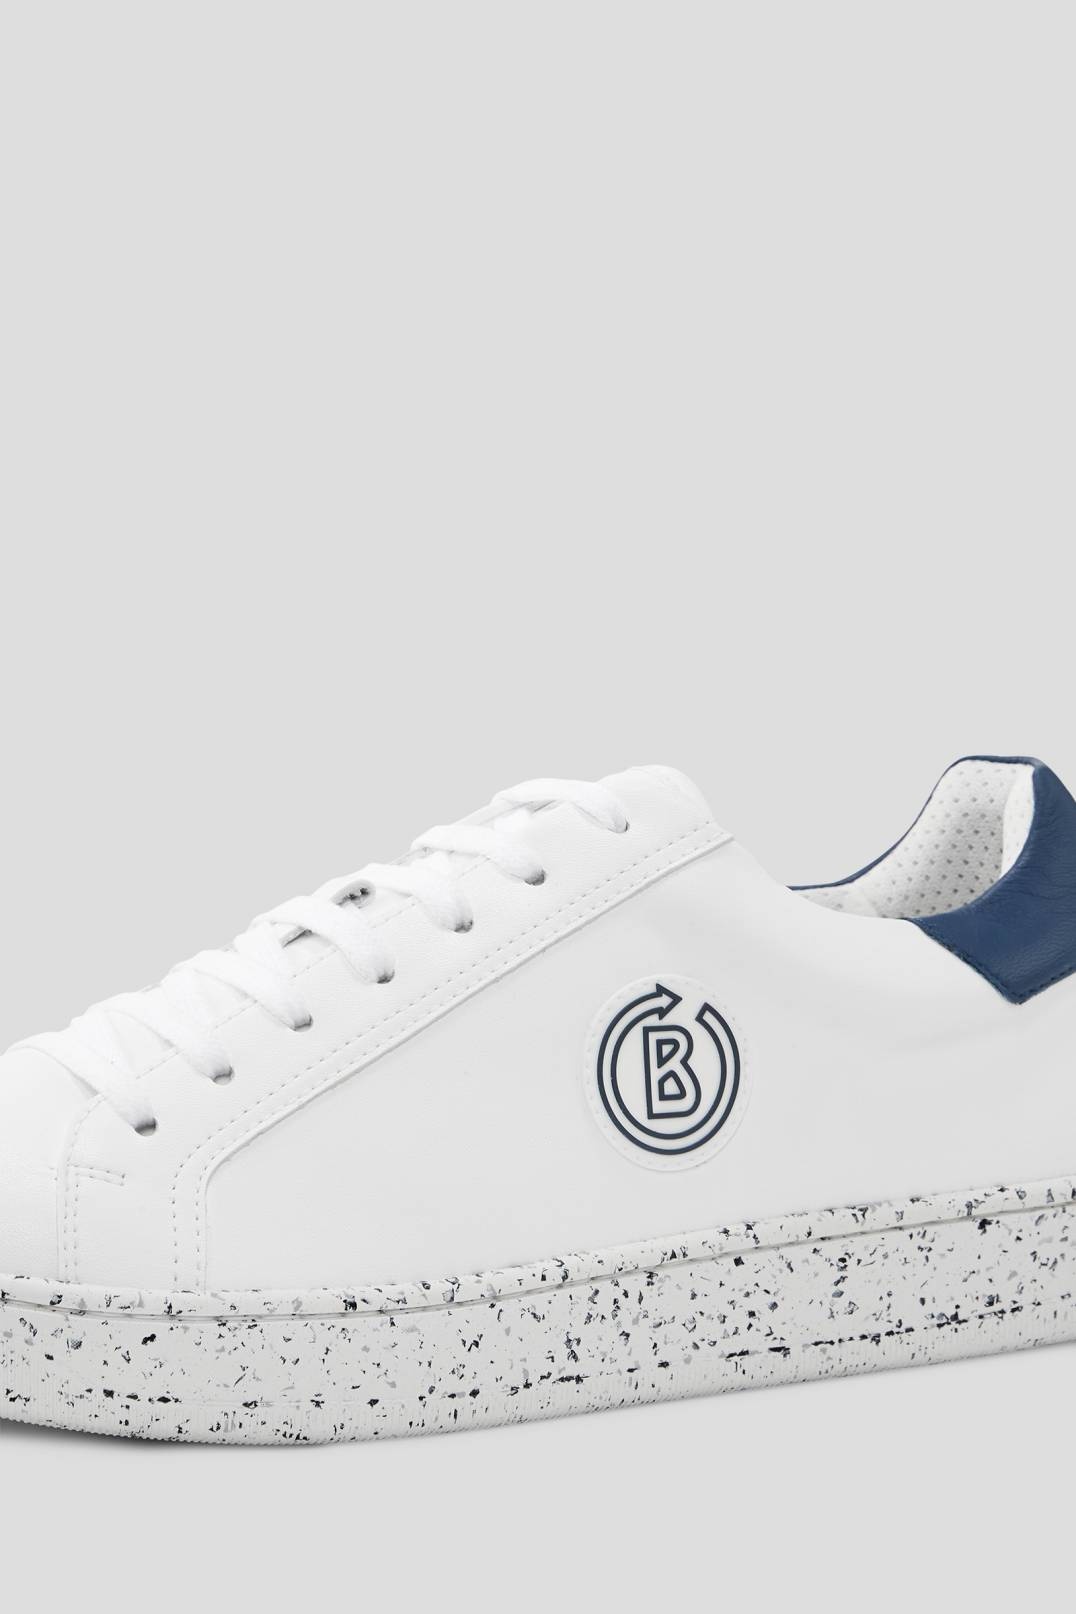 MALMÖ SUSTAINABLE SNEAKERS IN WHITE/NAVY BLUE - 4